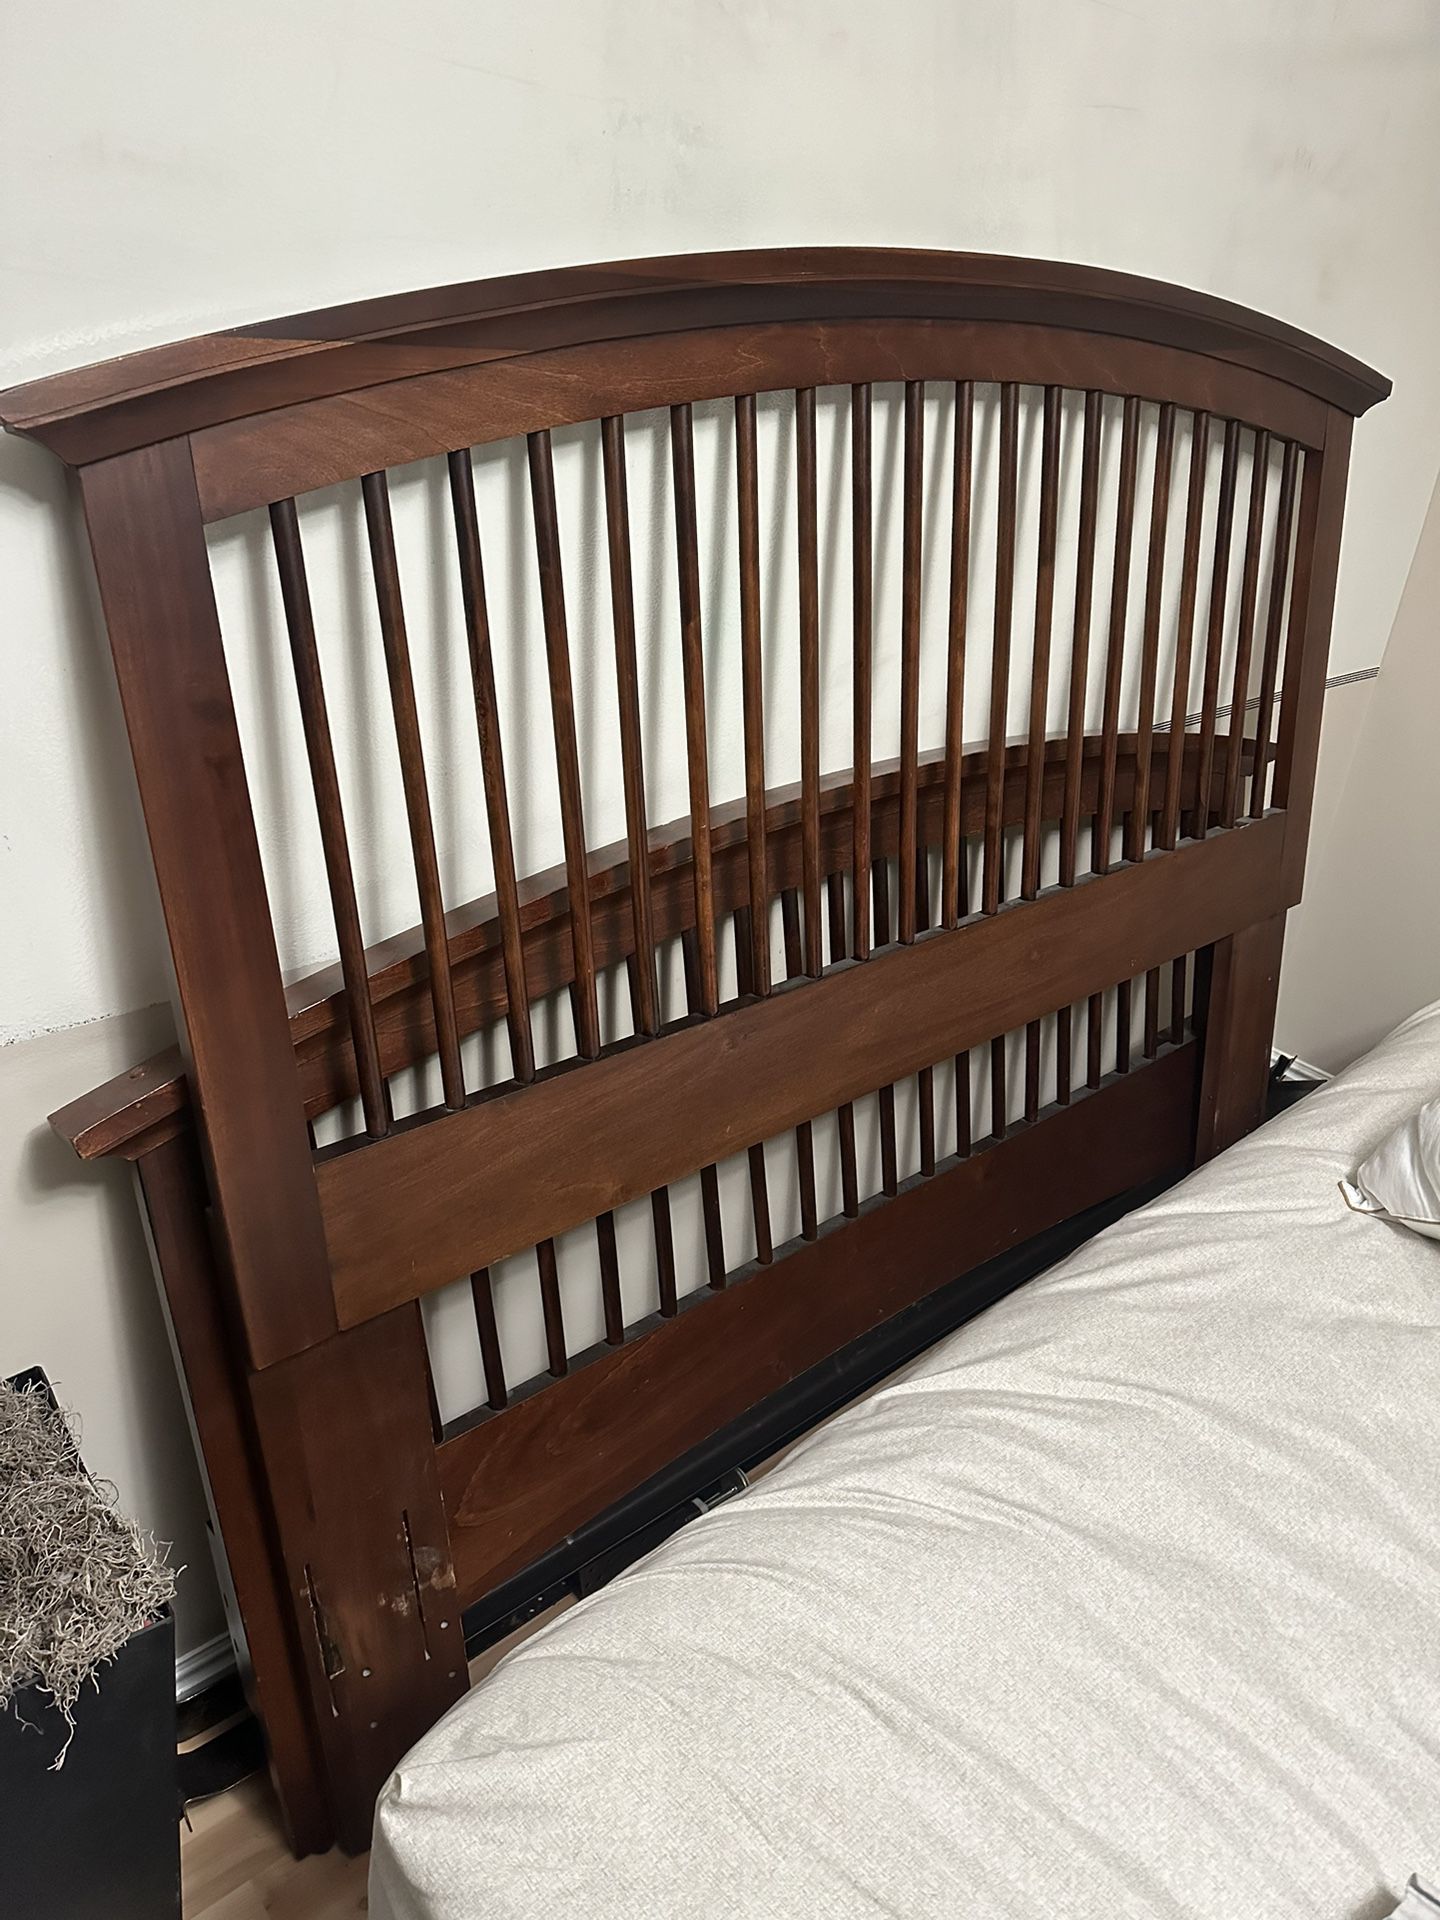 Cherry Wood Bed Frame